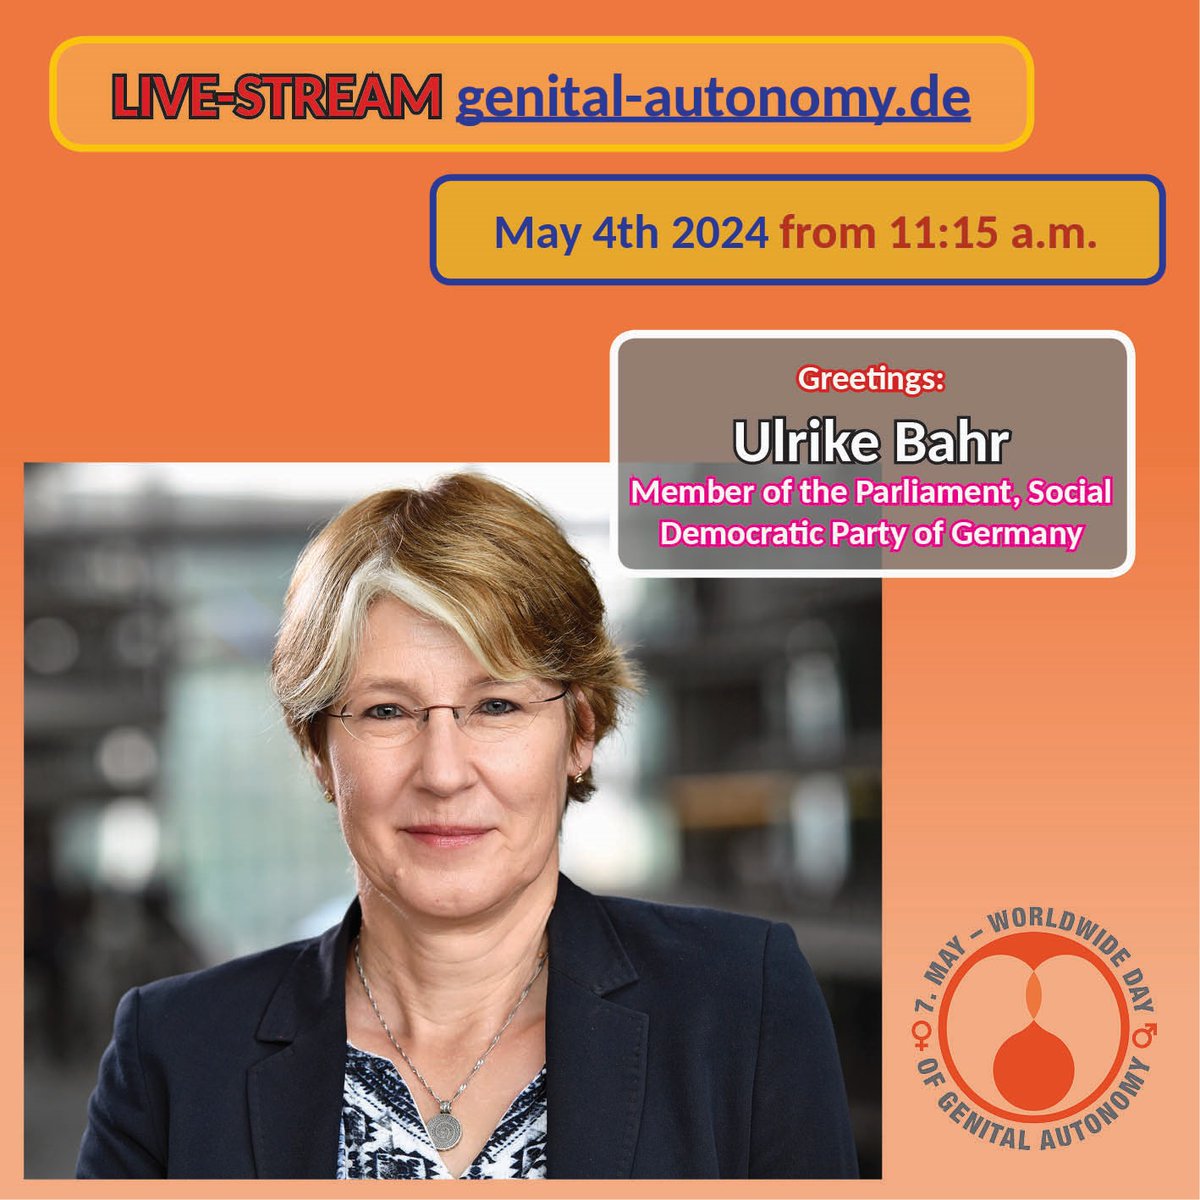 Ulrike Bahr, Social Democratic Party, Member of German Parliament, will take part in WWDOGA-2024-Livestream on May 4th!
genital-autonomy.de/speeches-2024/